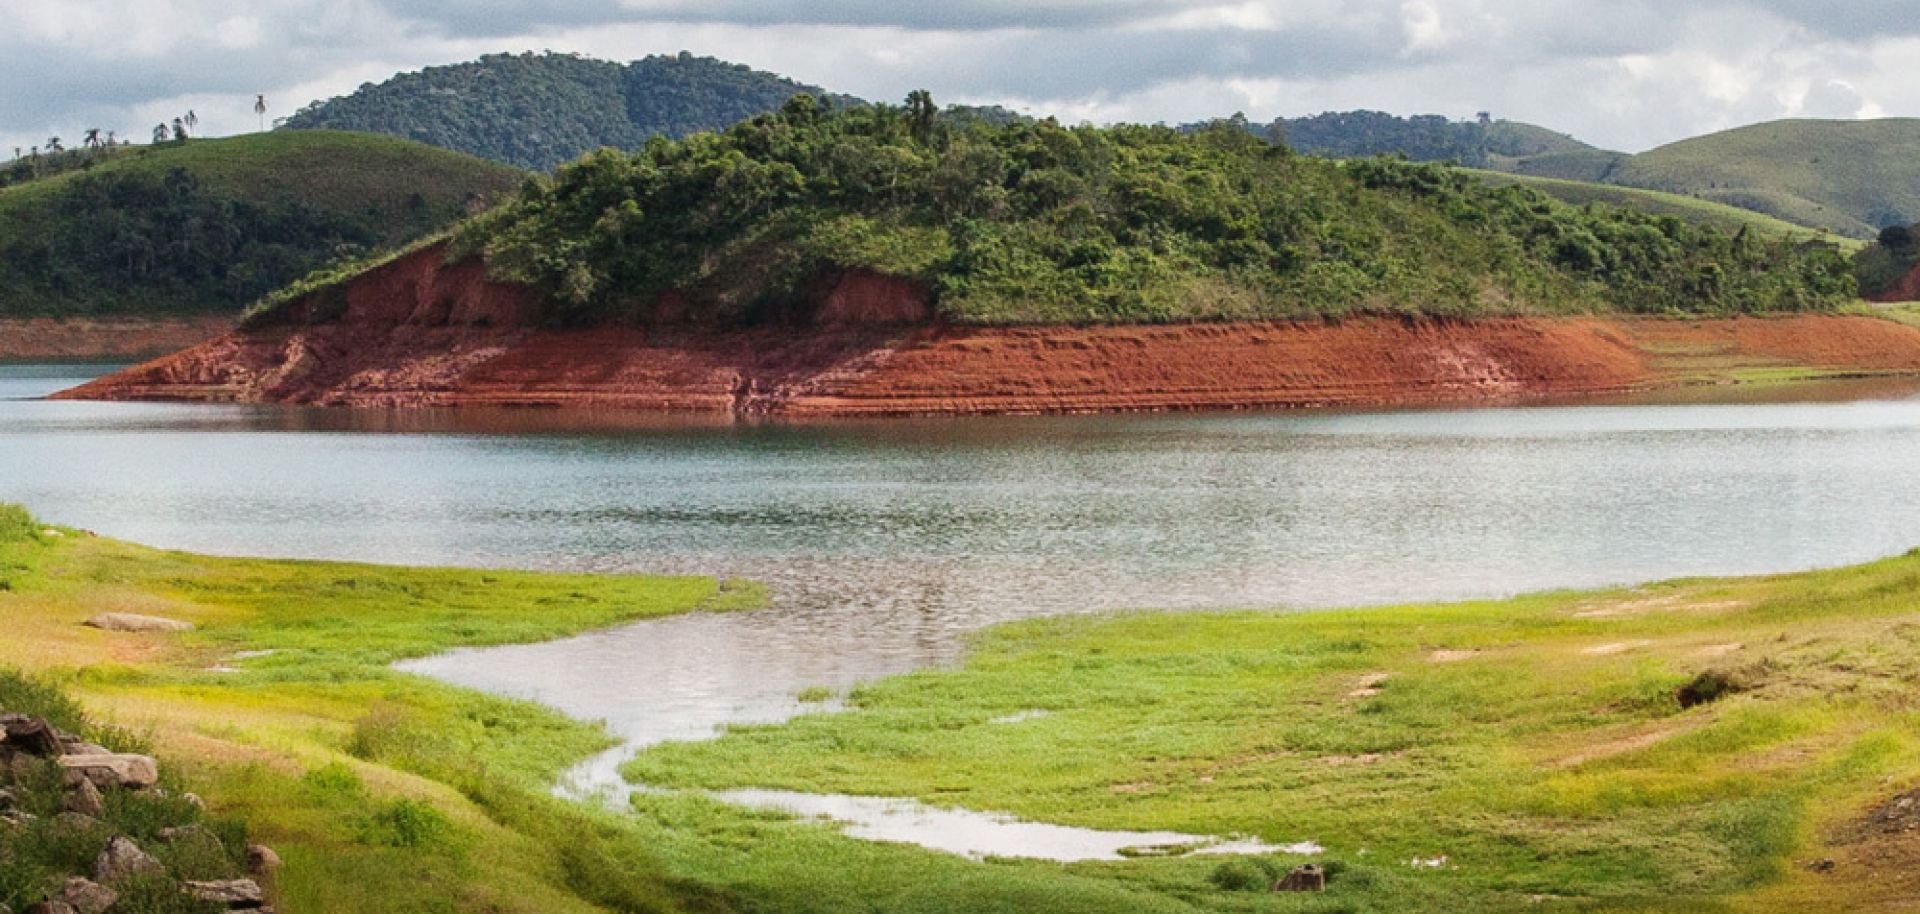 A general view shows the Jaguari Dam, one of the main reservoirs supplying Sao Paulo, Brazil, with its water level to 12 percent of its total capacity on April 25.